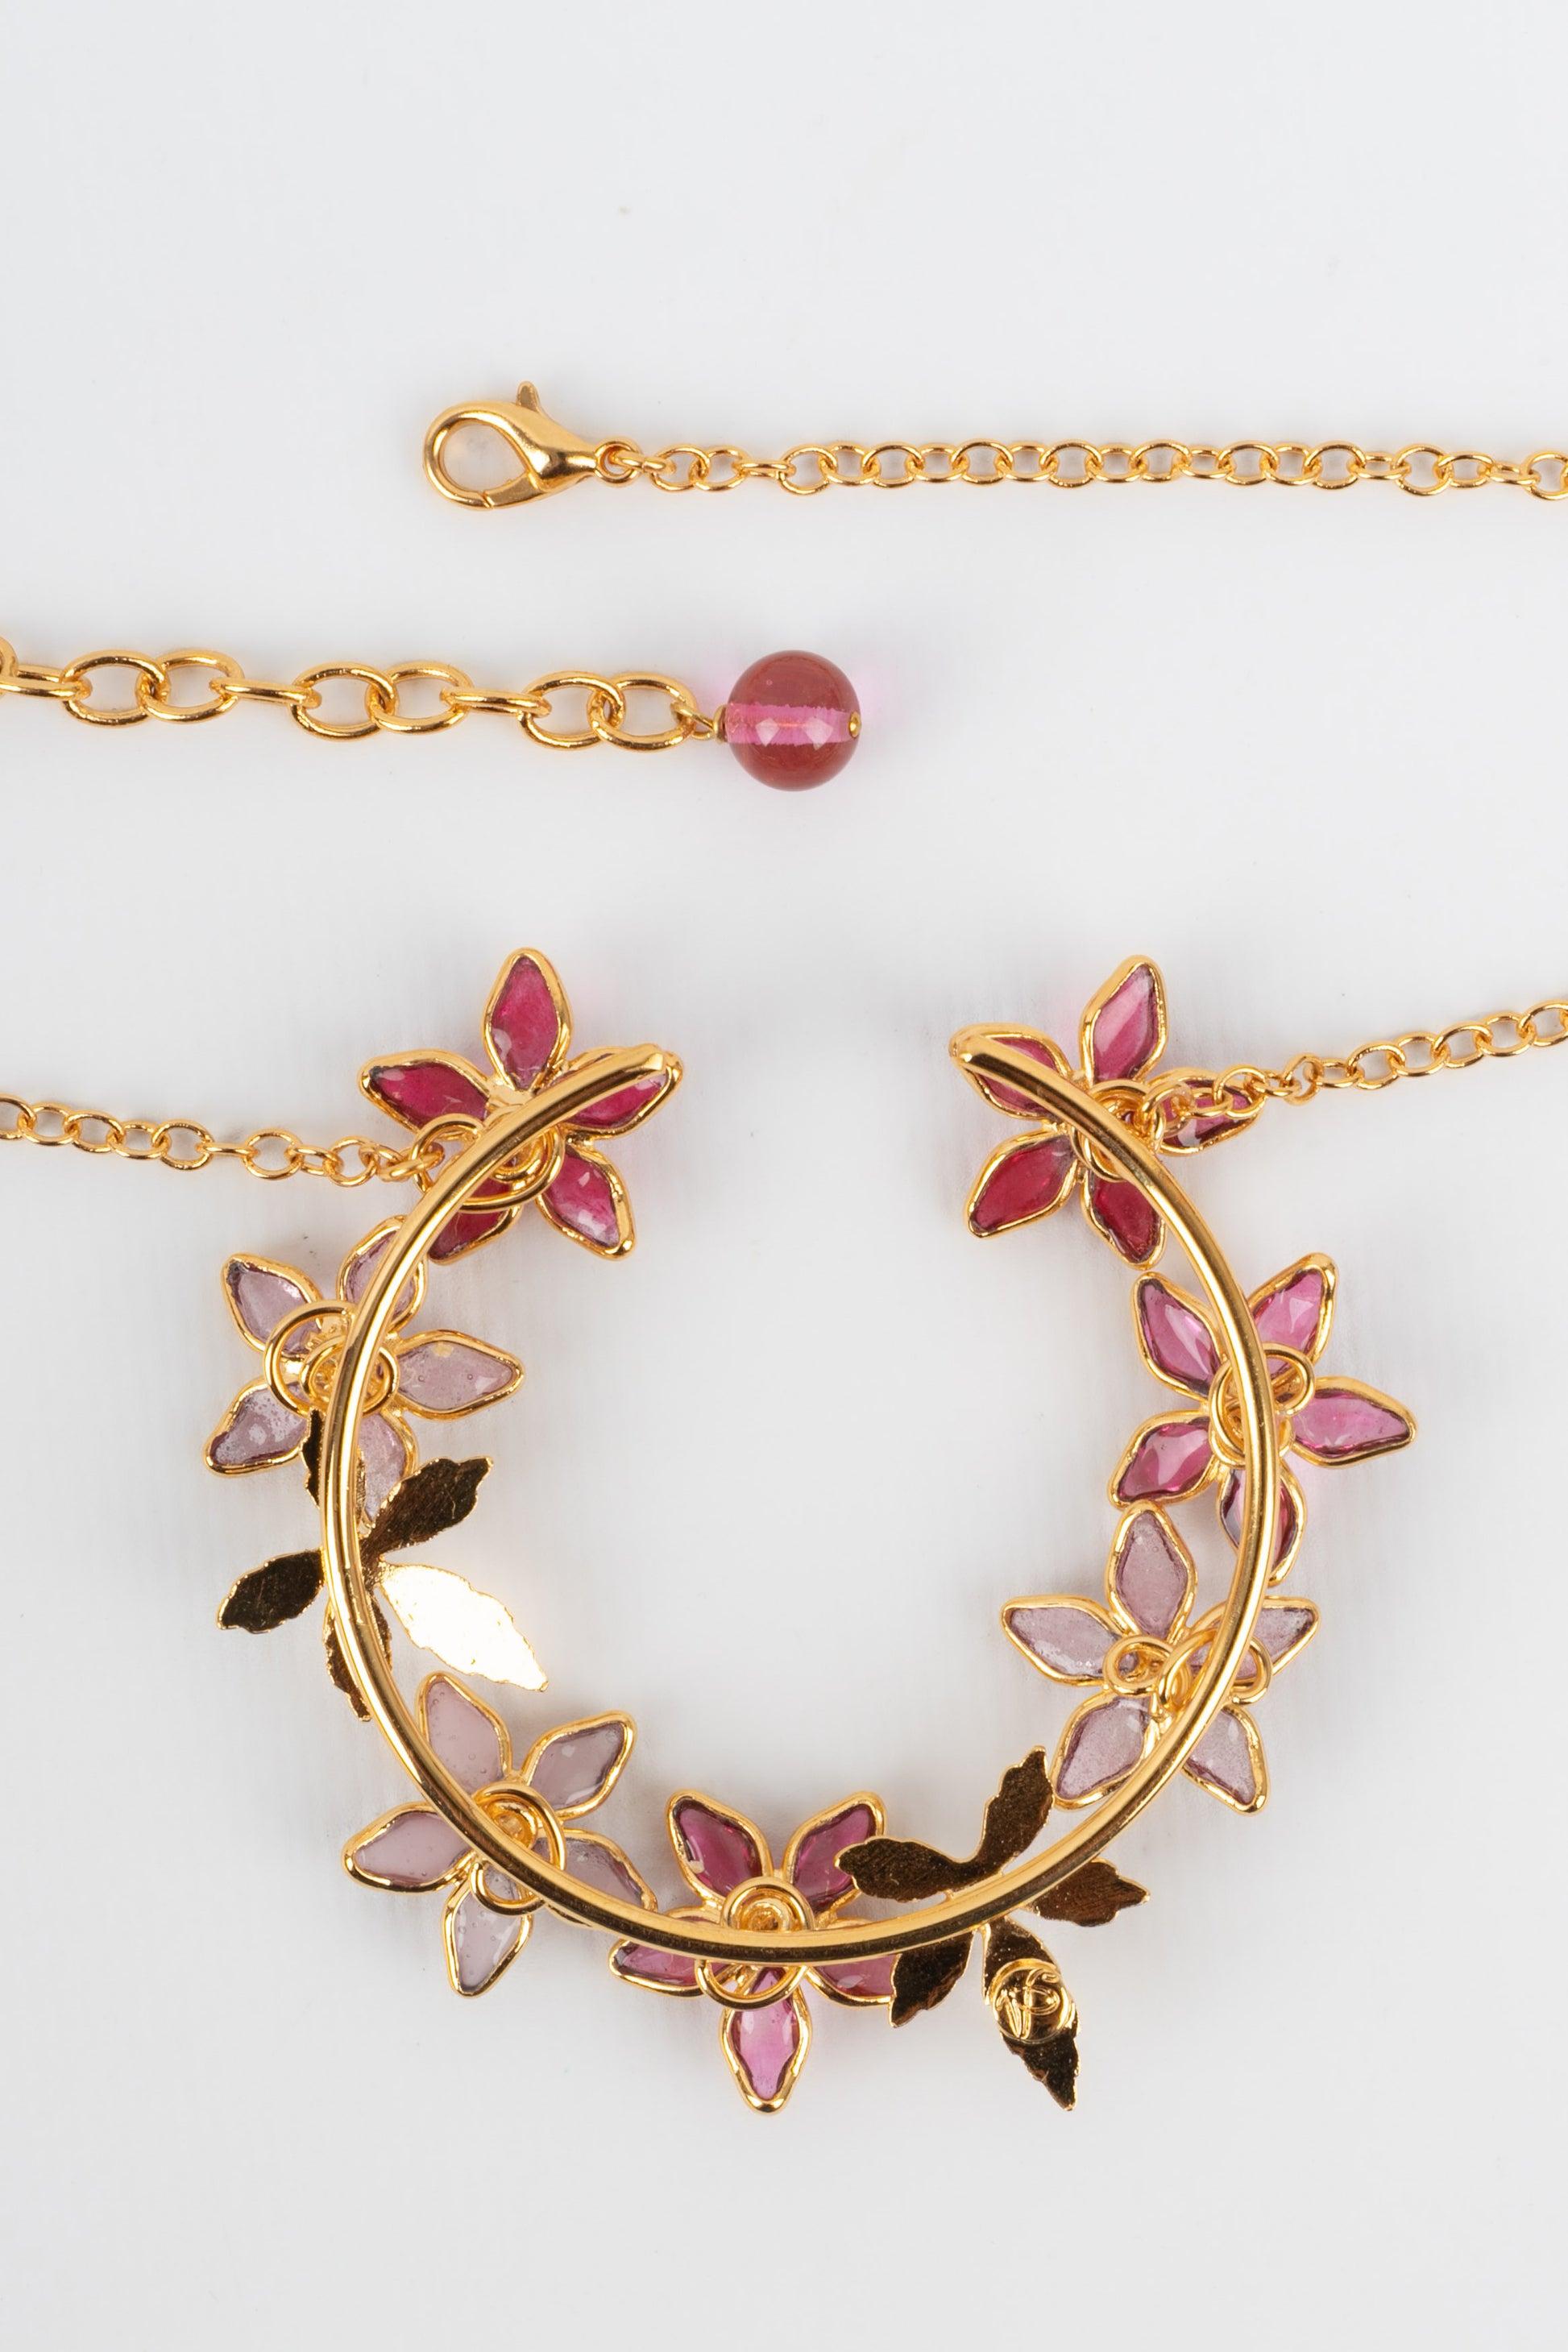 Augustine Golden Metal Necklace with Rhinestones and Glass Paste in Pink Tones For Sale 3